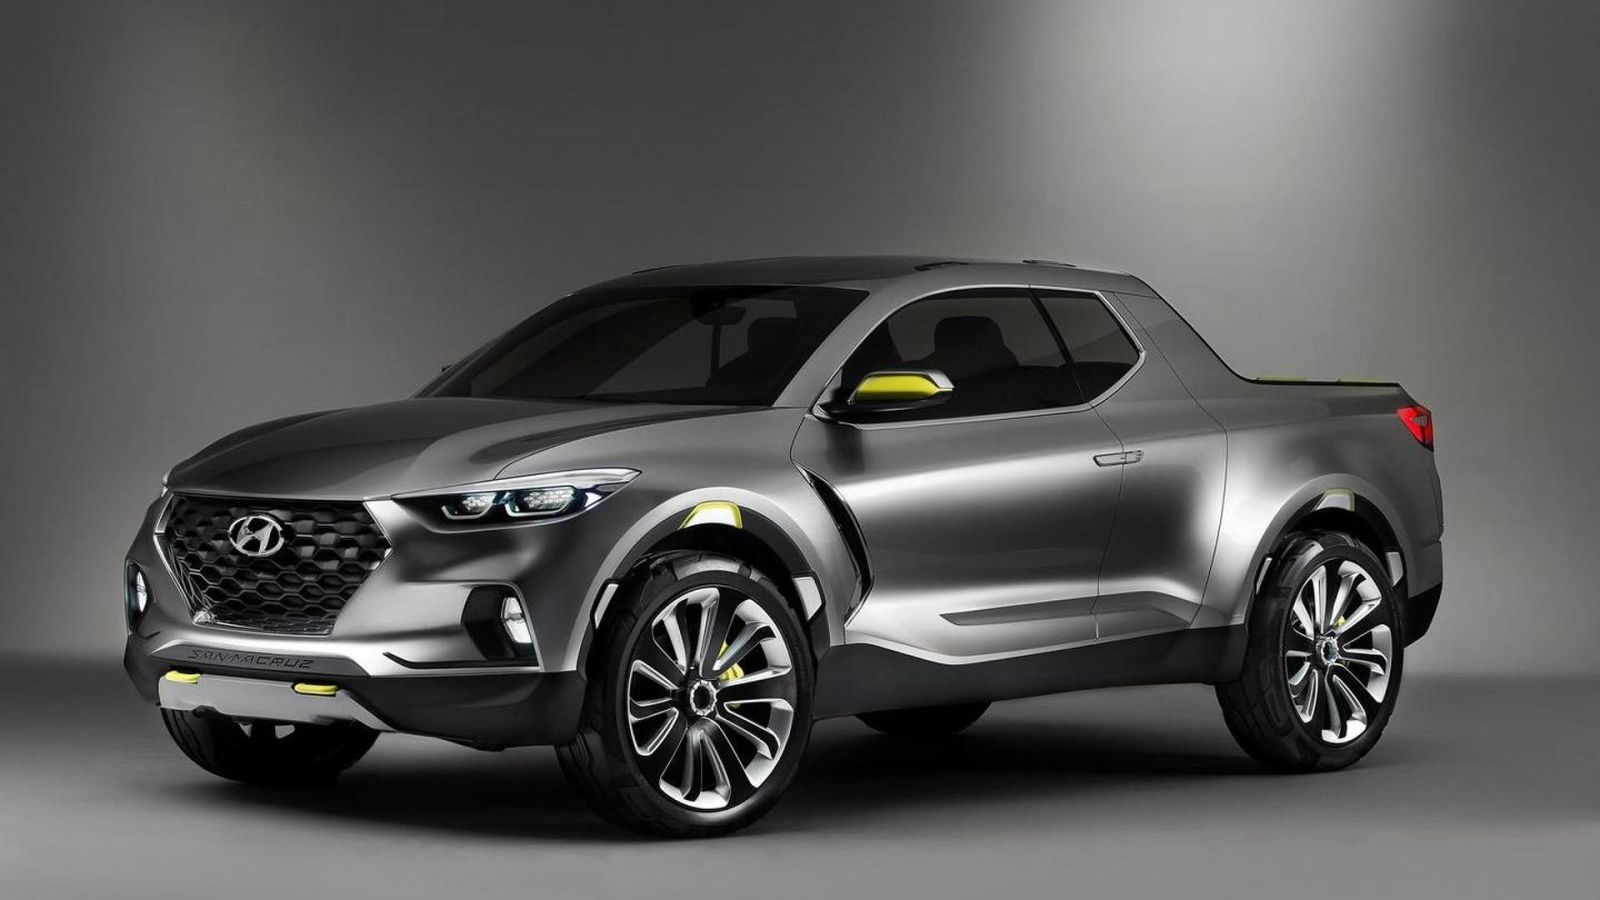 Illustration for article titled Hyundai says the Santa Cruz truck is coming in 2021